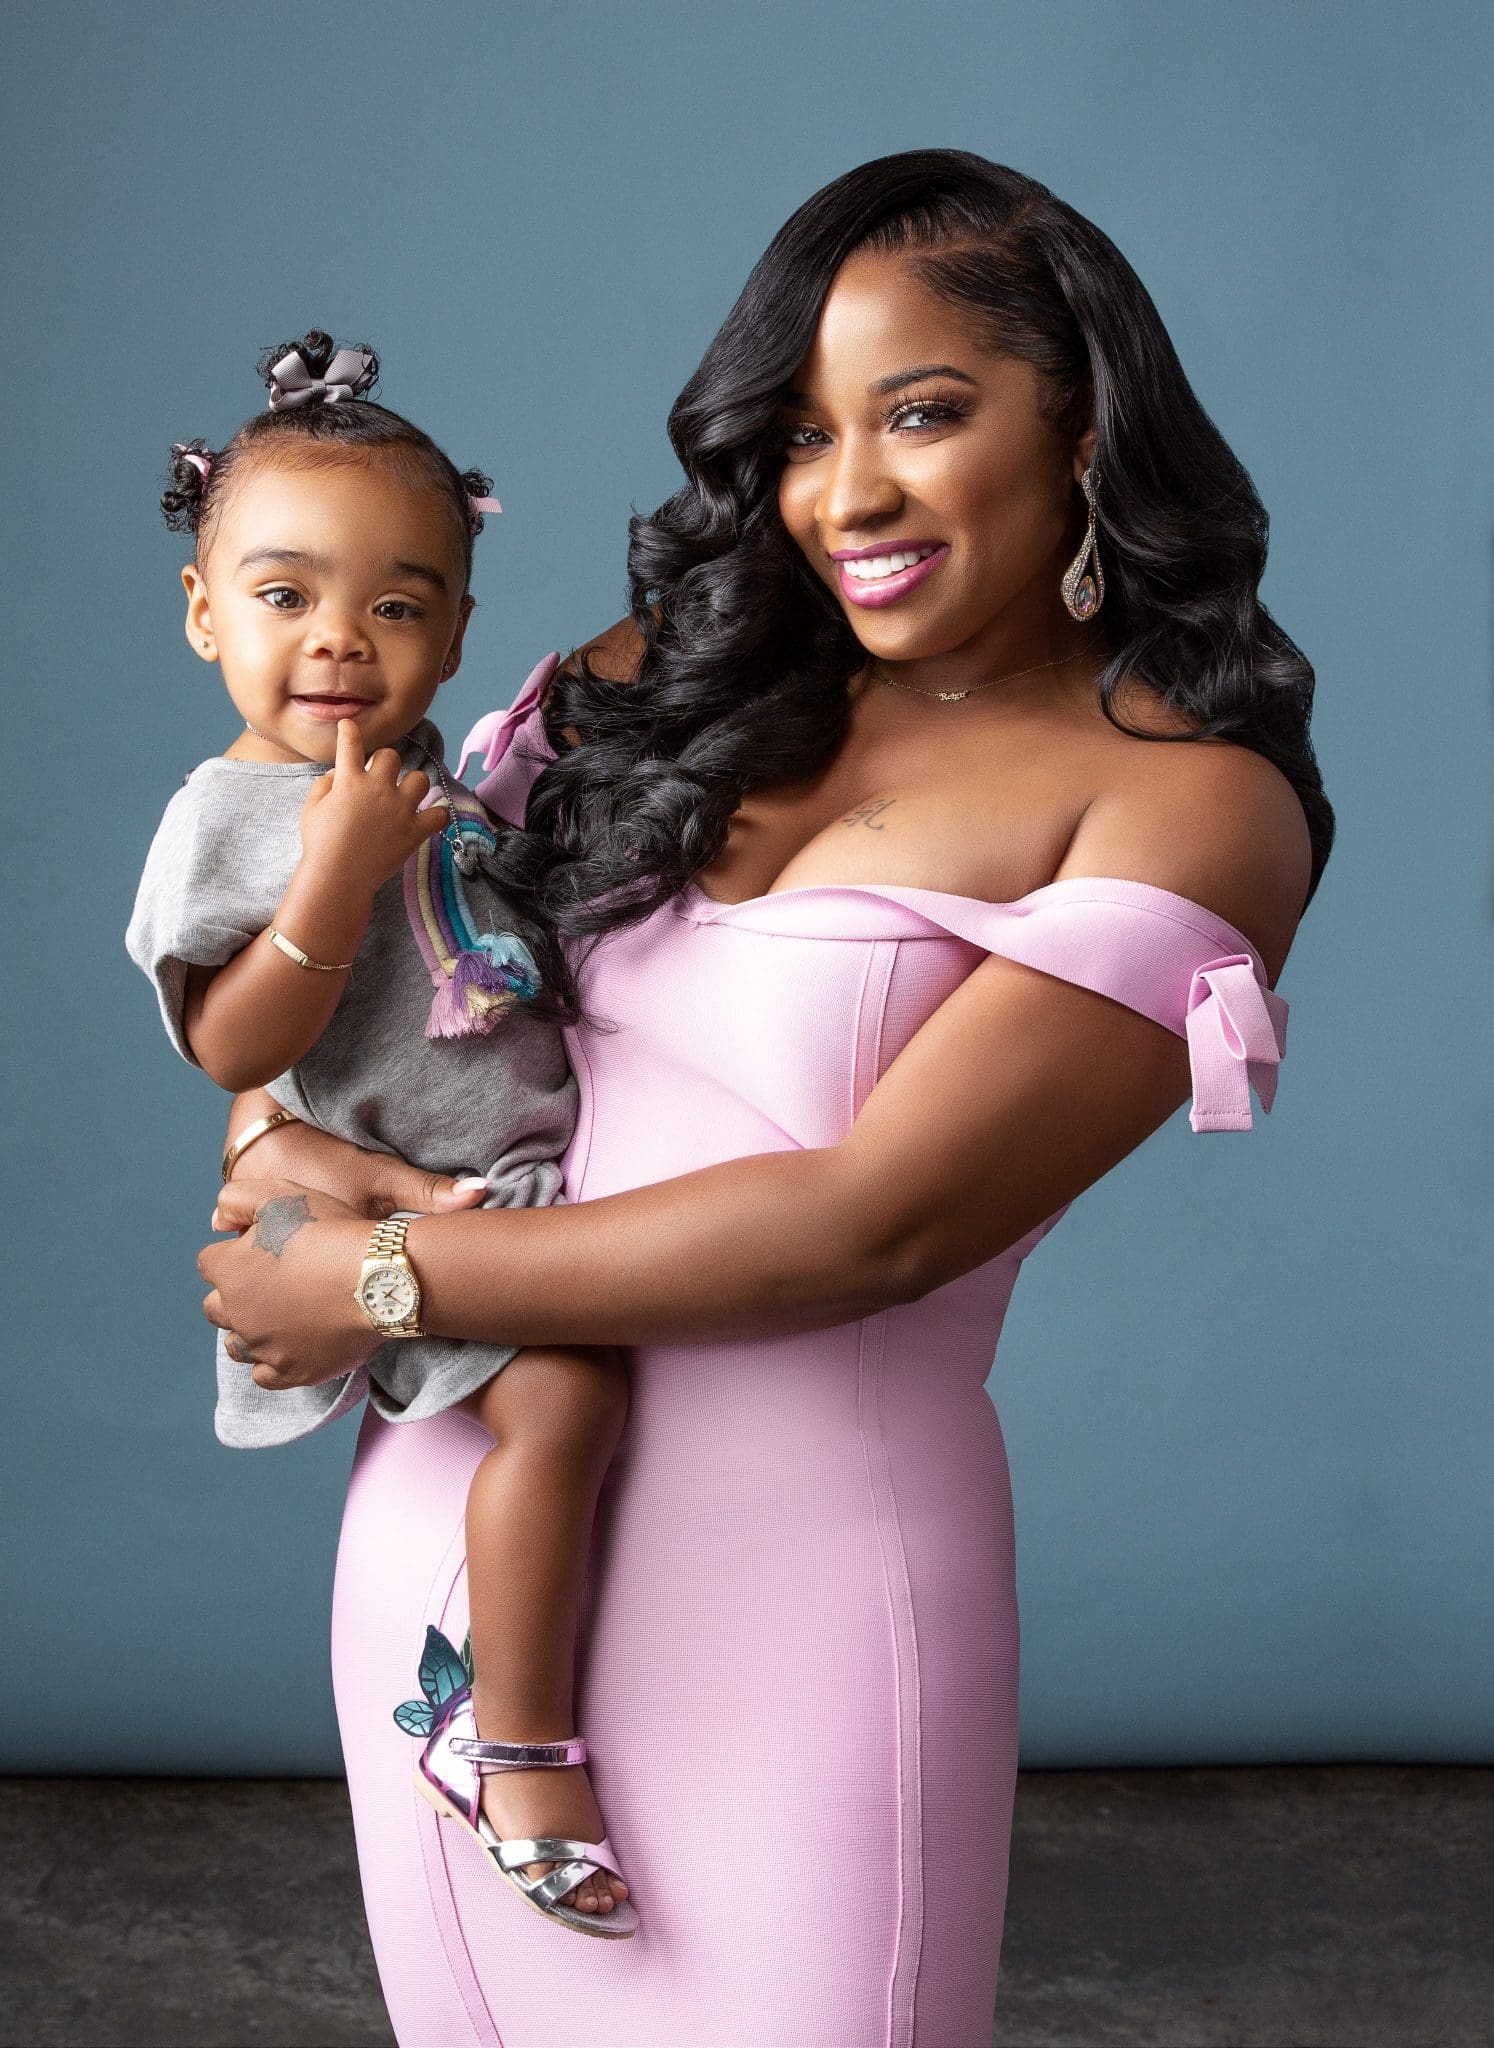 Toya Johnson And Her Daughter, Reign Rushing Are Twinning In Fashion Nova And Nova Kids - See The Photo